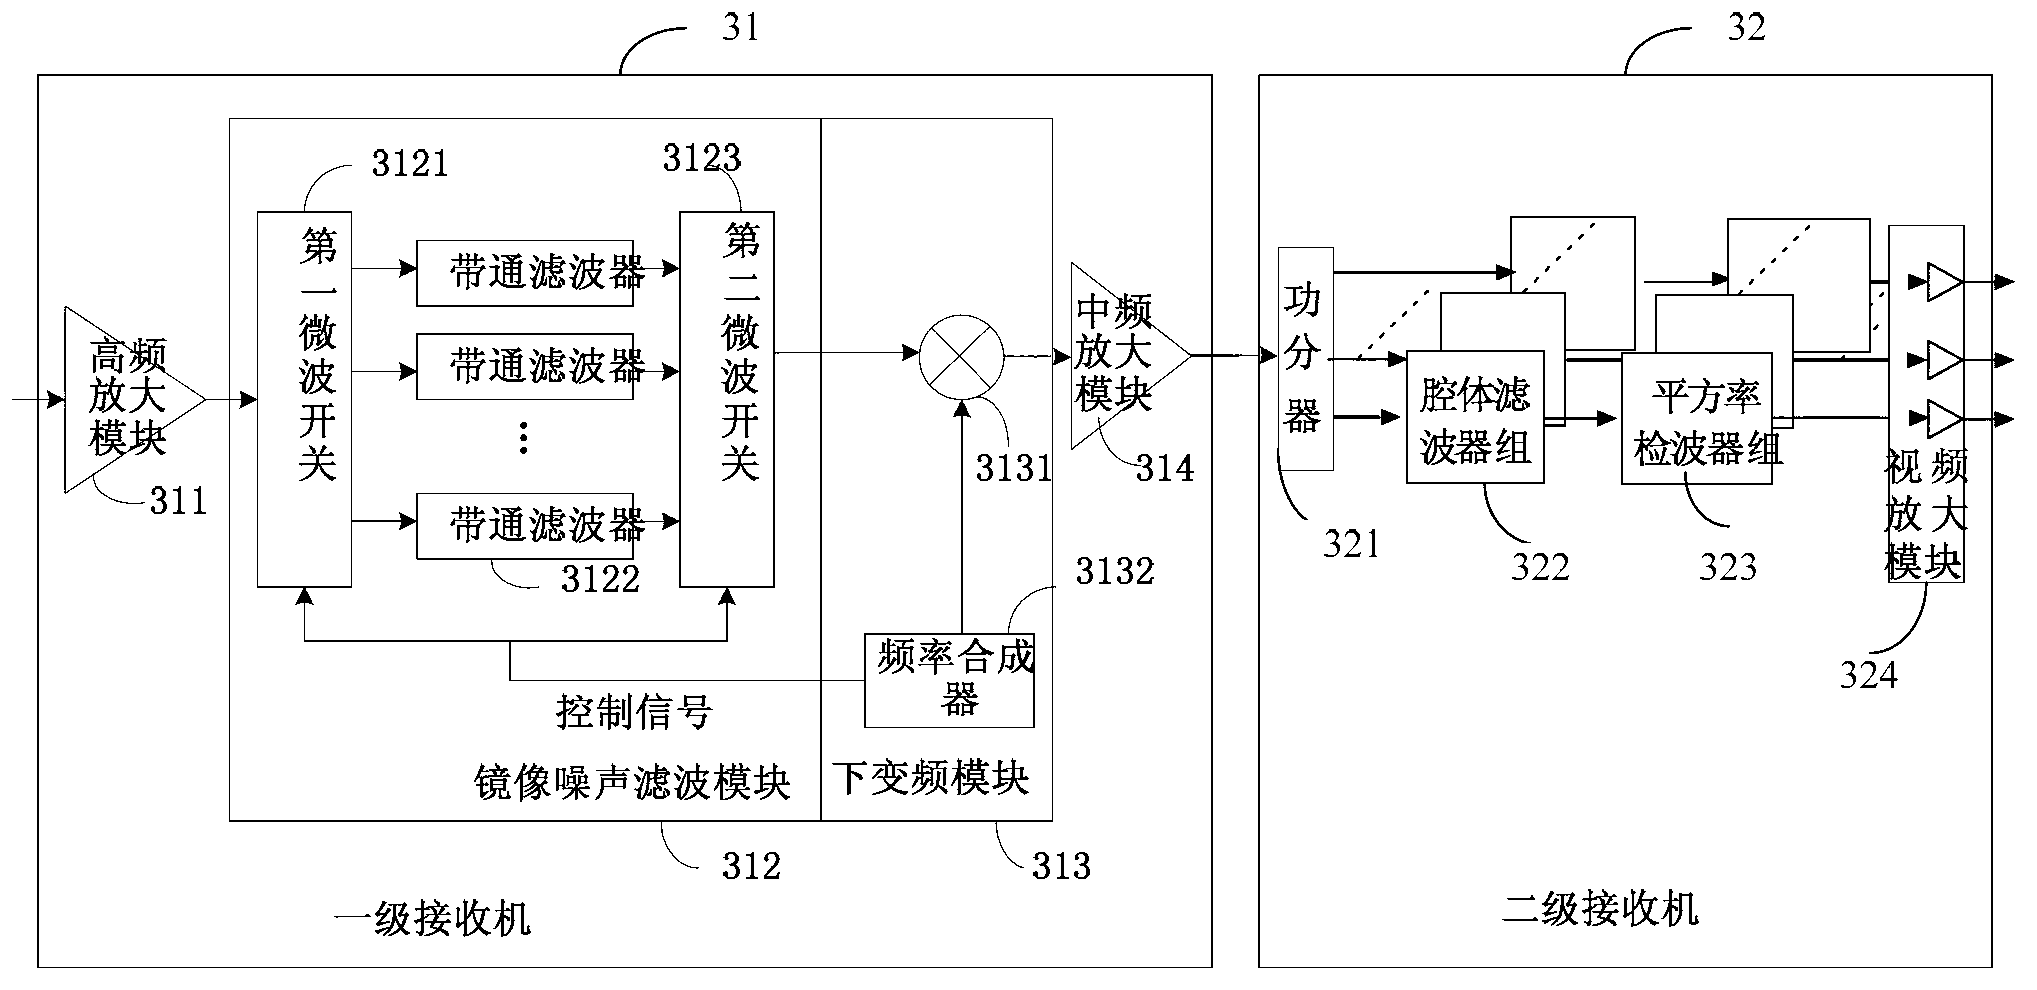 Microwave hyperspectral receiver and method